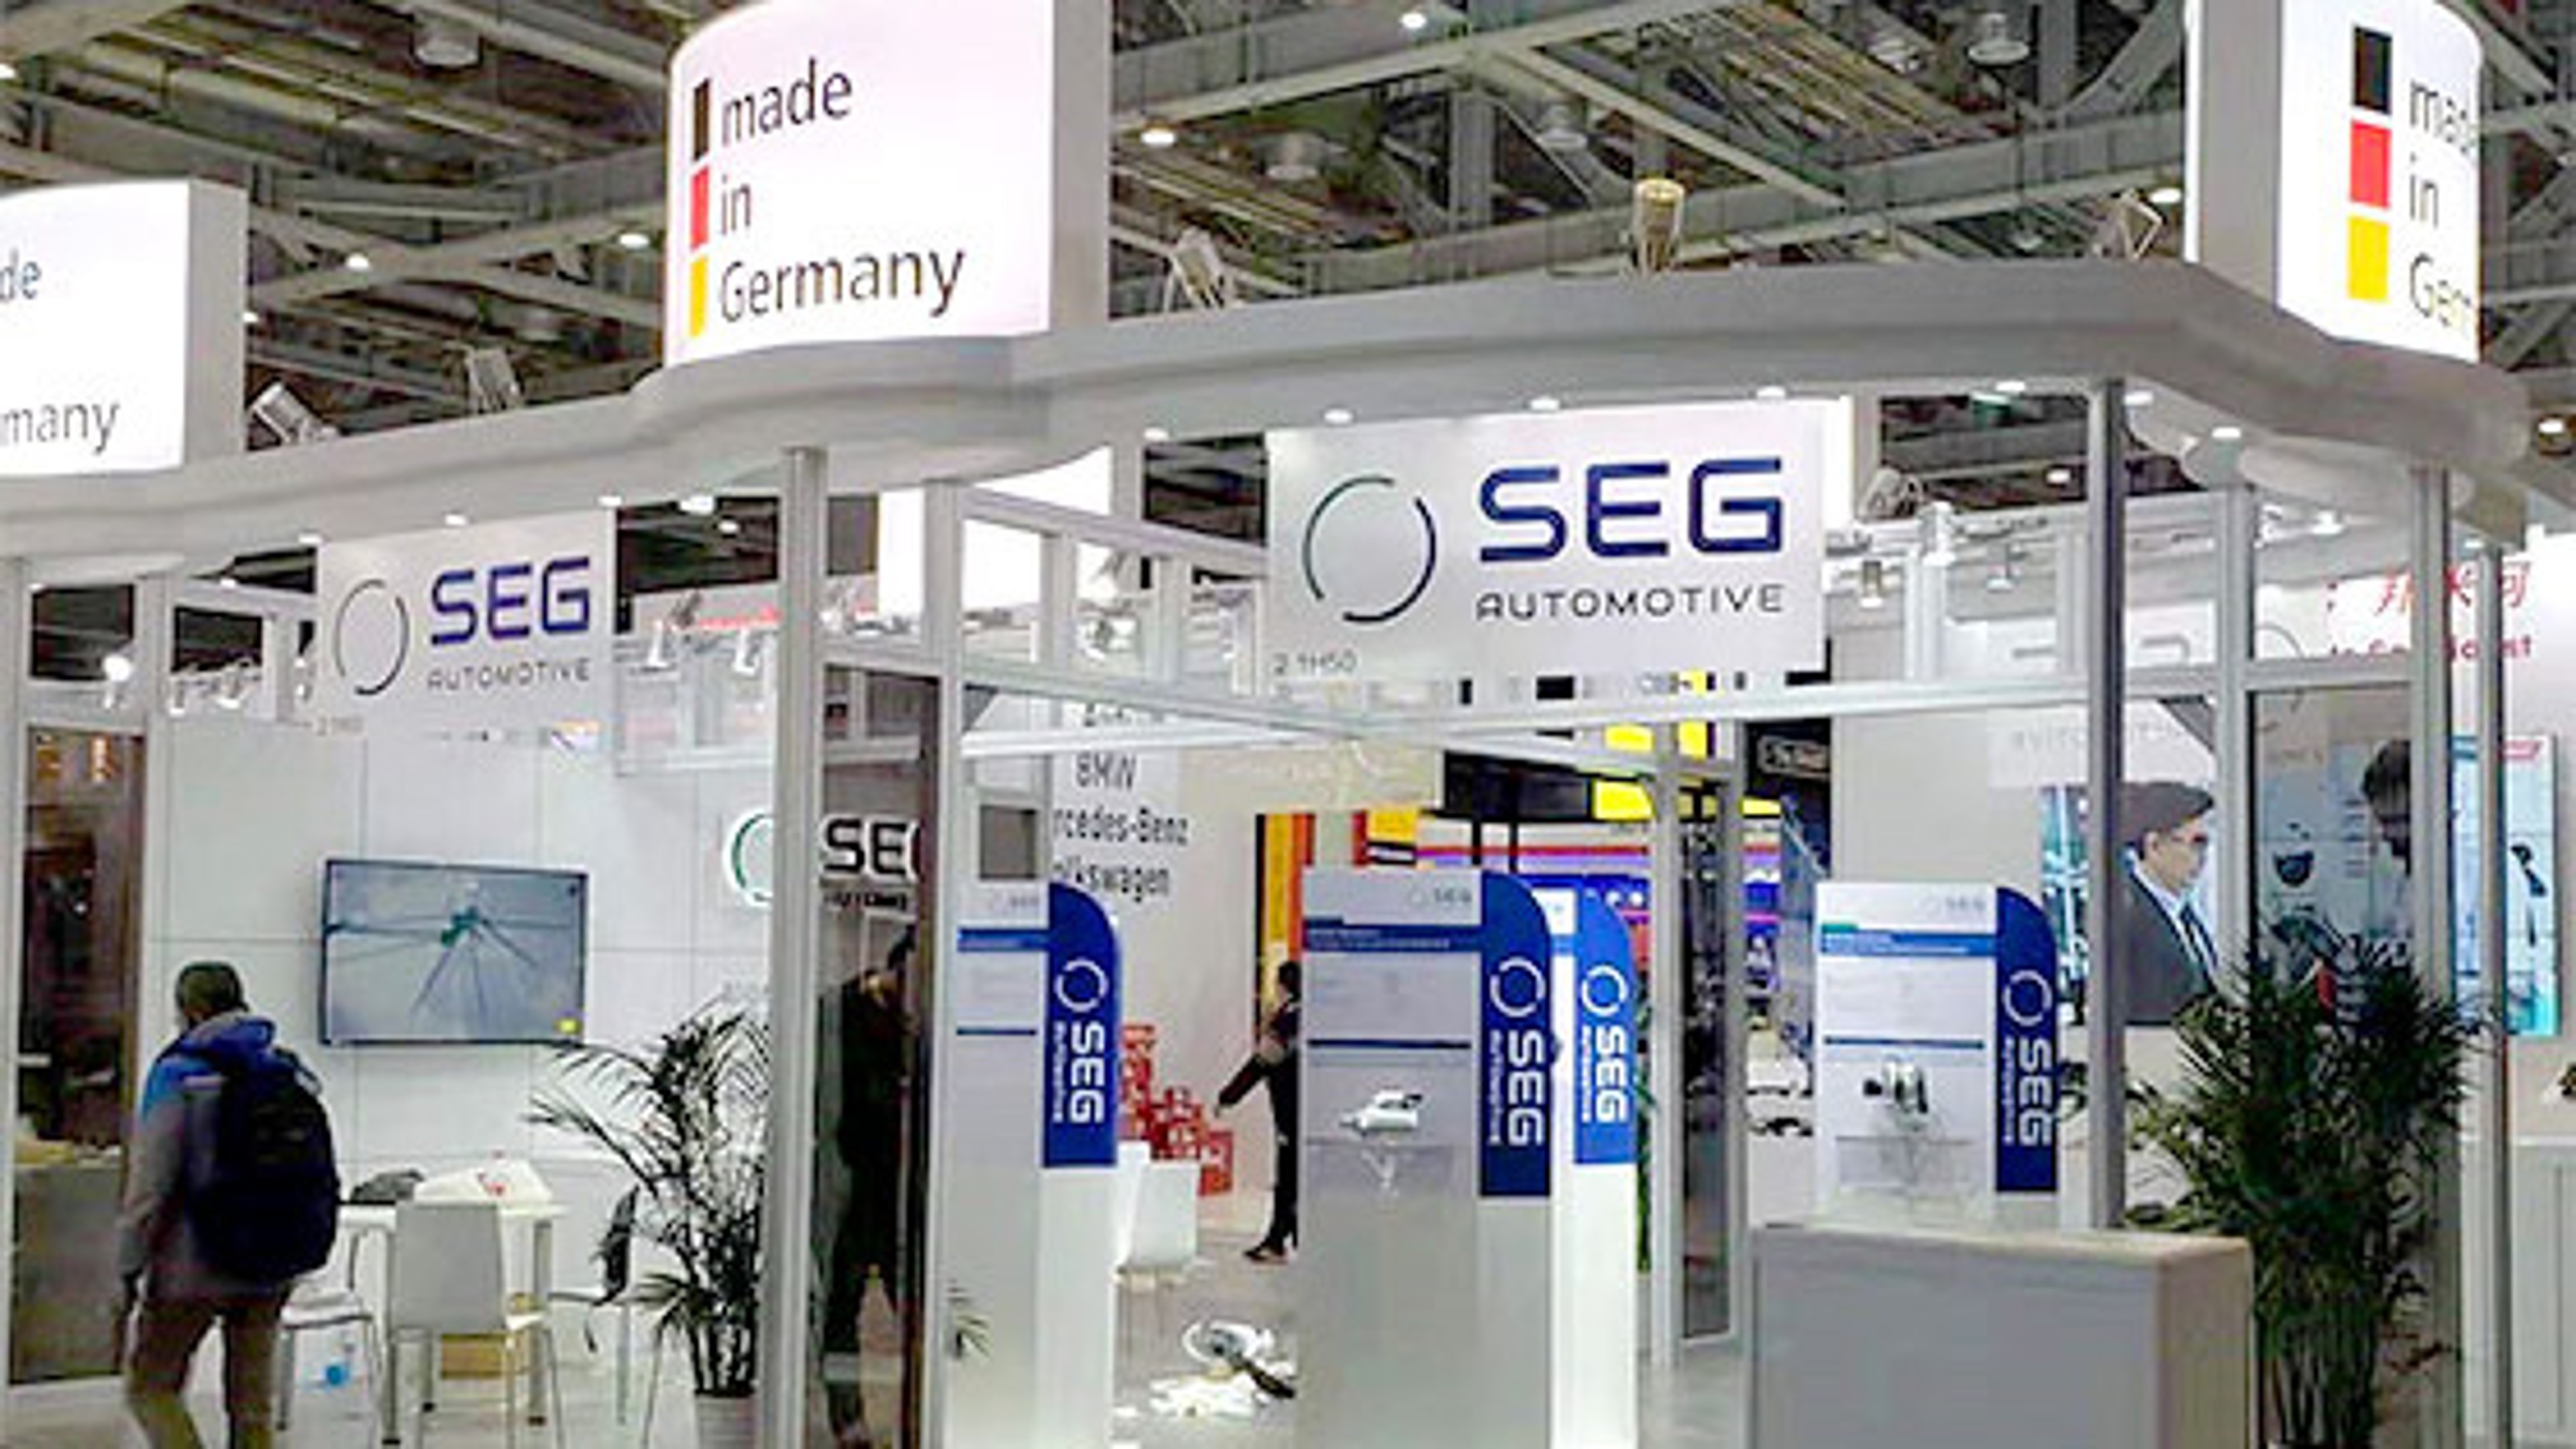 SEG Automotive booth as part of the German pavilion at Automechanika Shanghai trade show